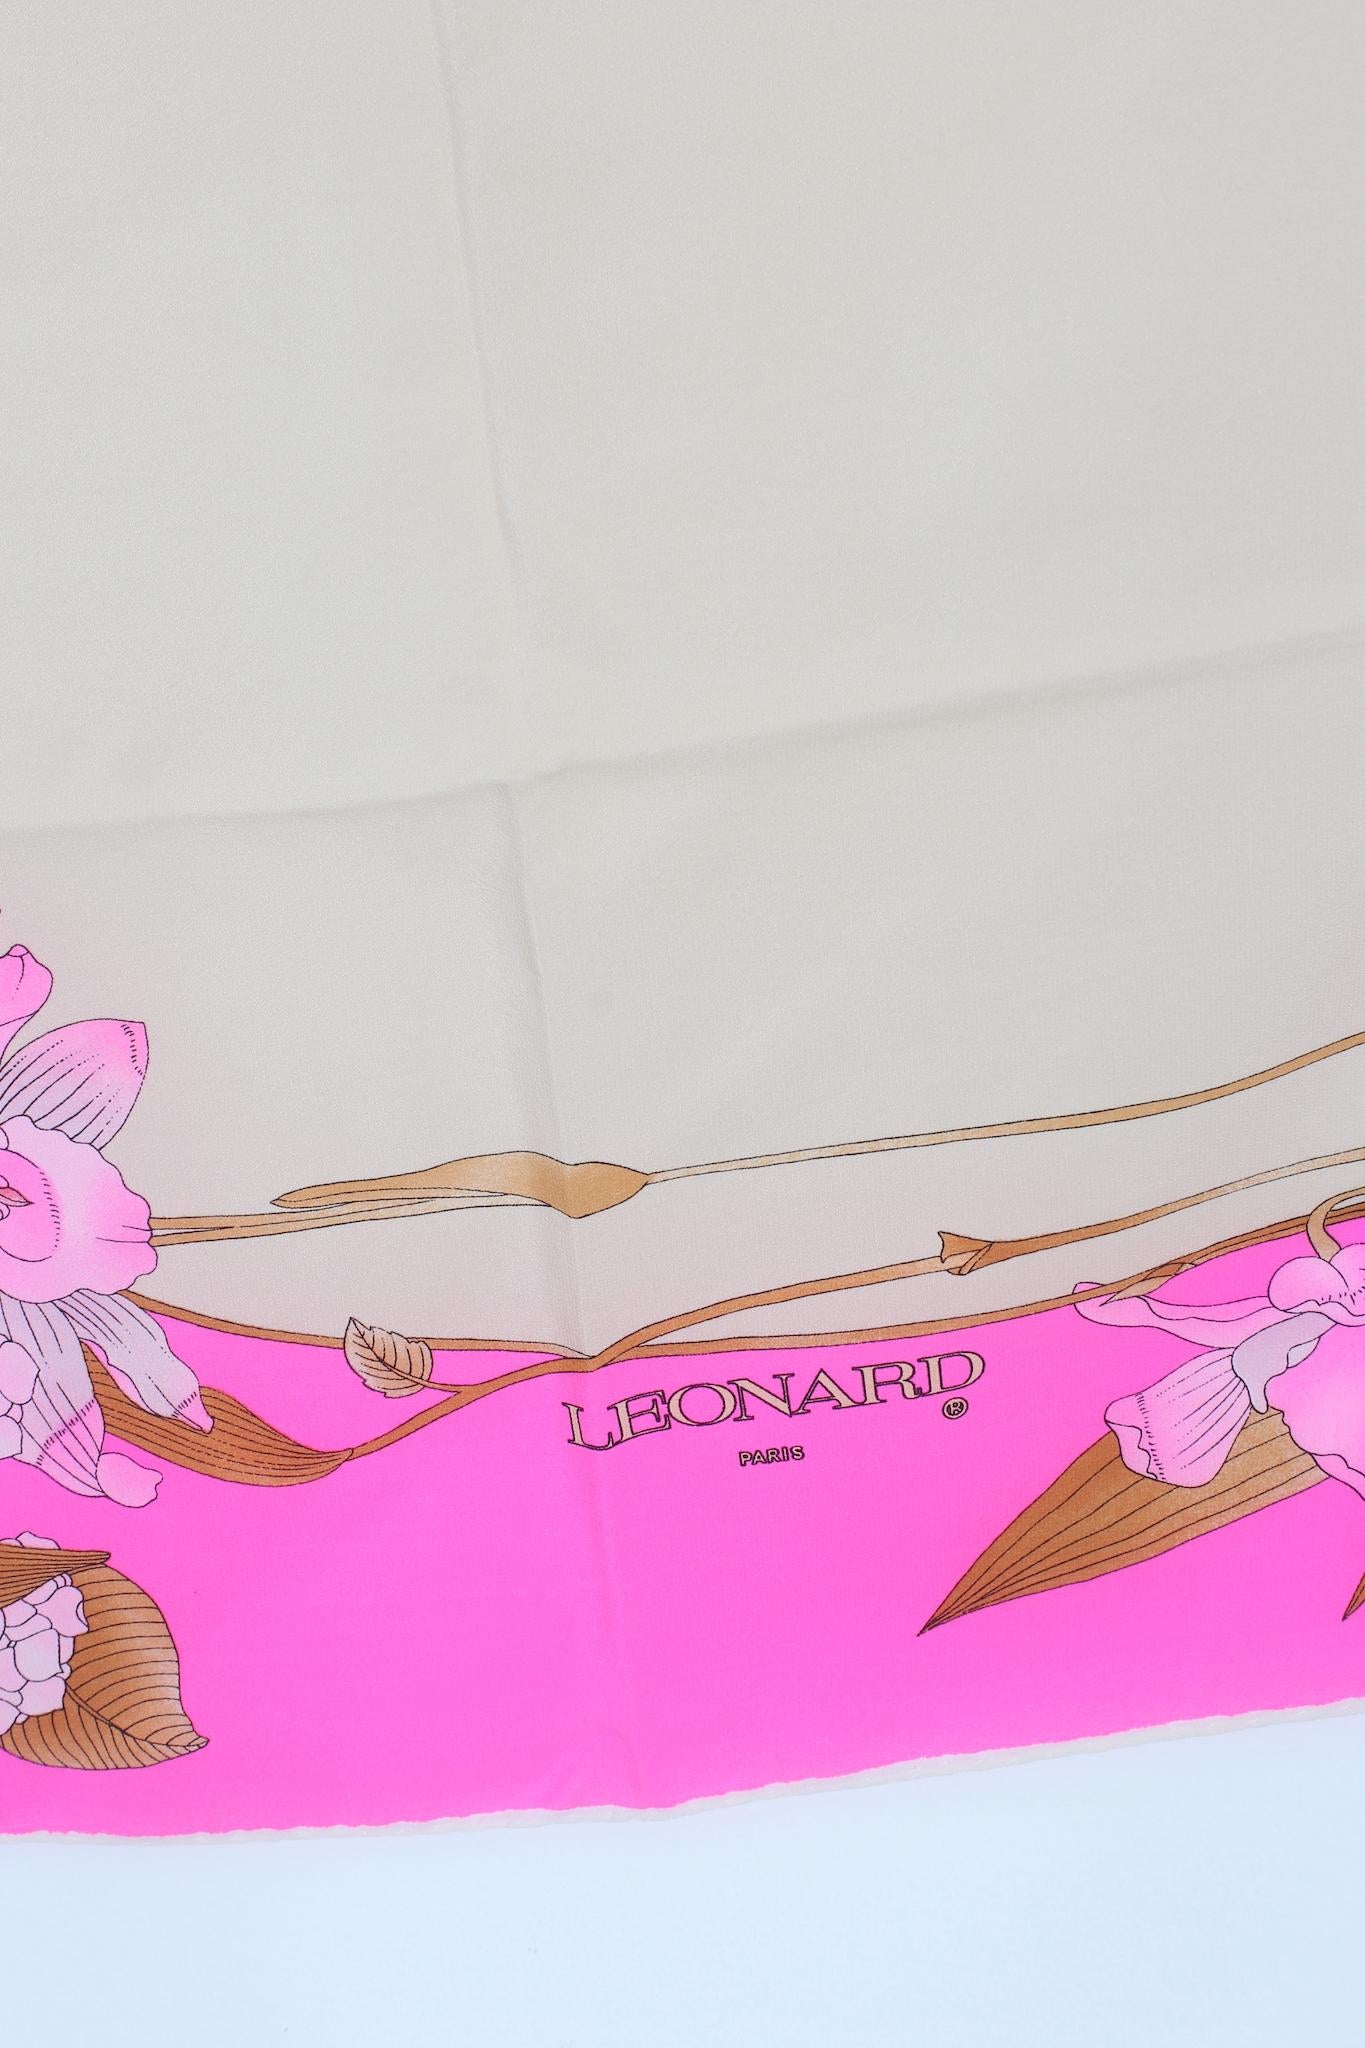 Leonard Paris vintage 80s scarf. Pink and brown floral pattern, 100% silk fabric. Made in italy.

Measures: 86 x 86 cm